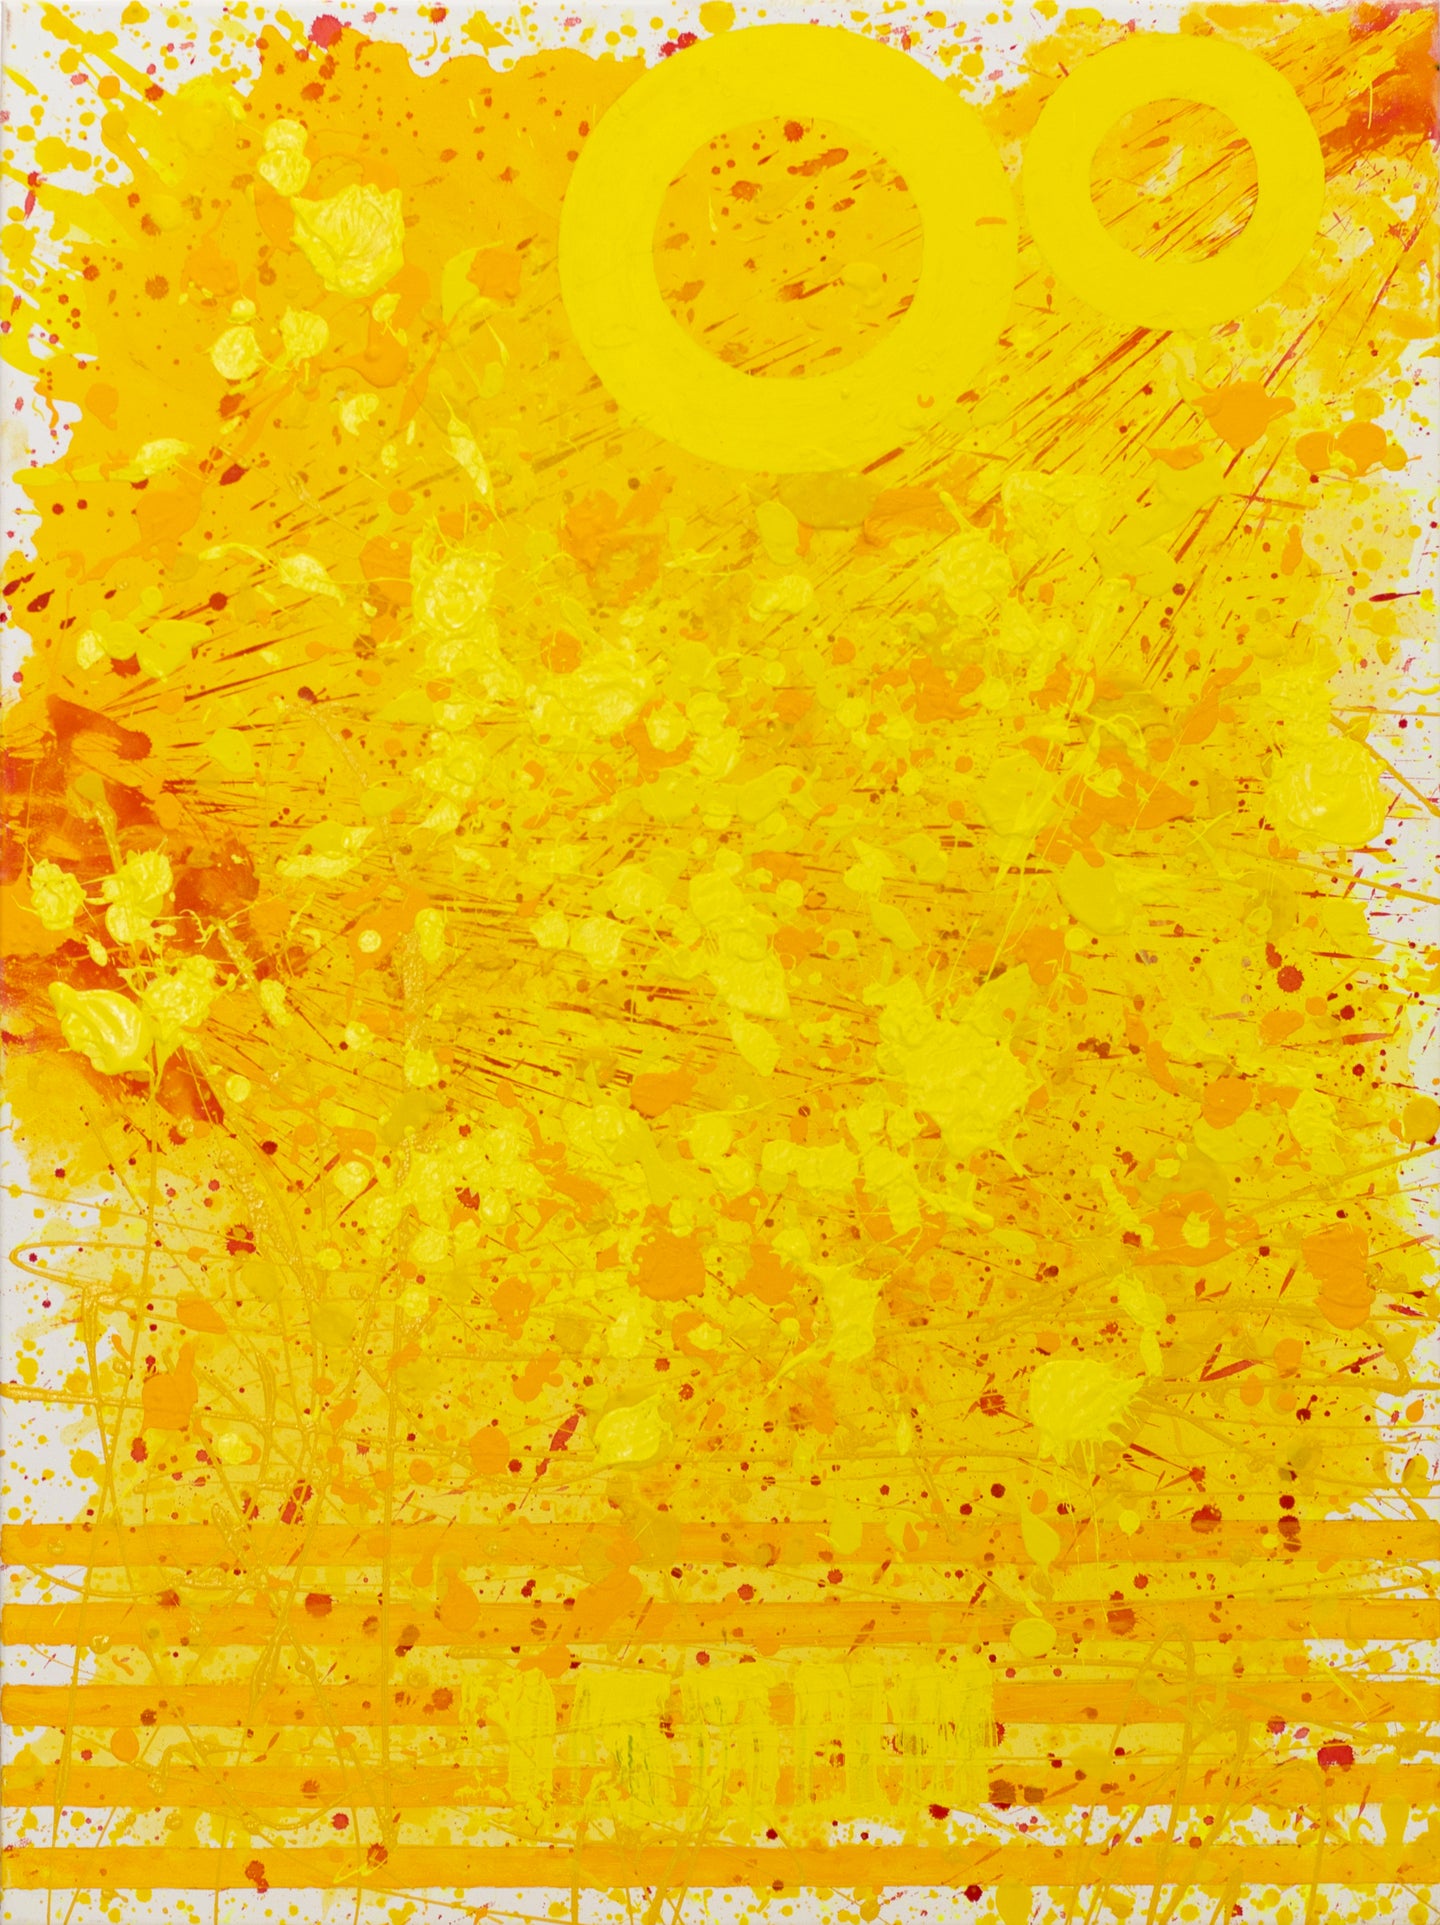 J. Steven Manolis, Sunshine (48.36.02), #6 sunshine series, 2020, acrylic and latex enamel on canvas, 48 x 36 inches, Sunshine art, Yellow Abstract Art for Sale at Manolis Projects Art Gallery, Miami Fl